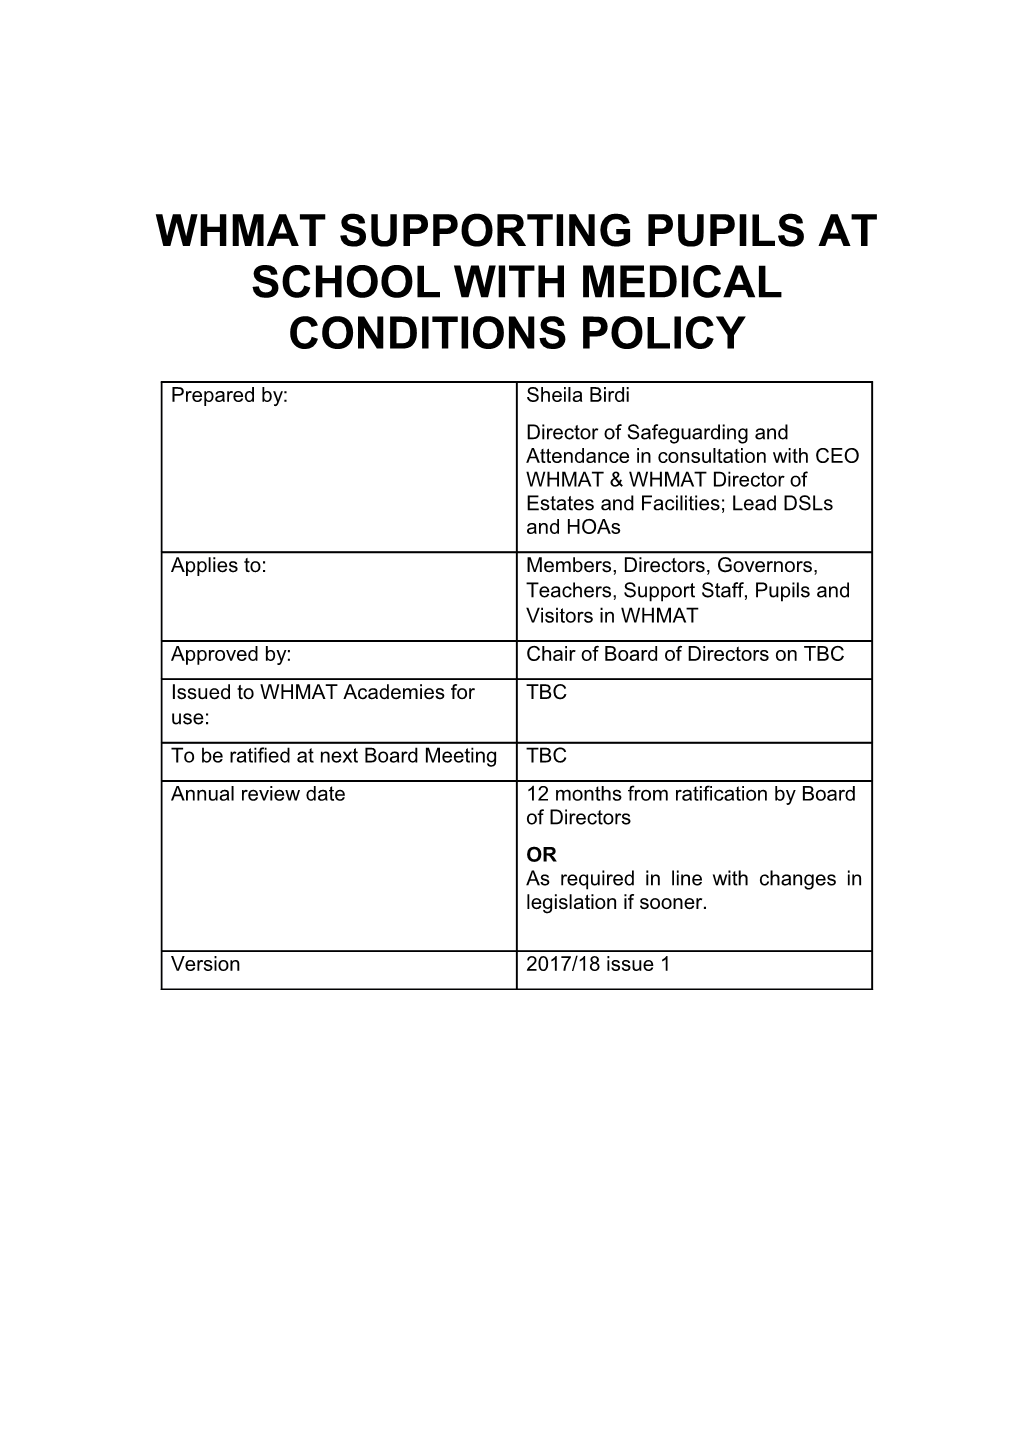 Whmat Supporting Pupils at School with Medical Conditions Policy